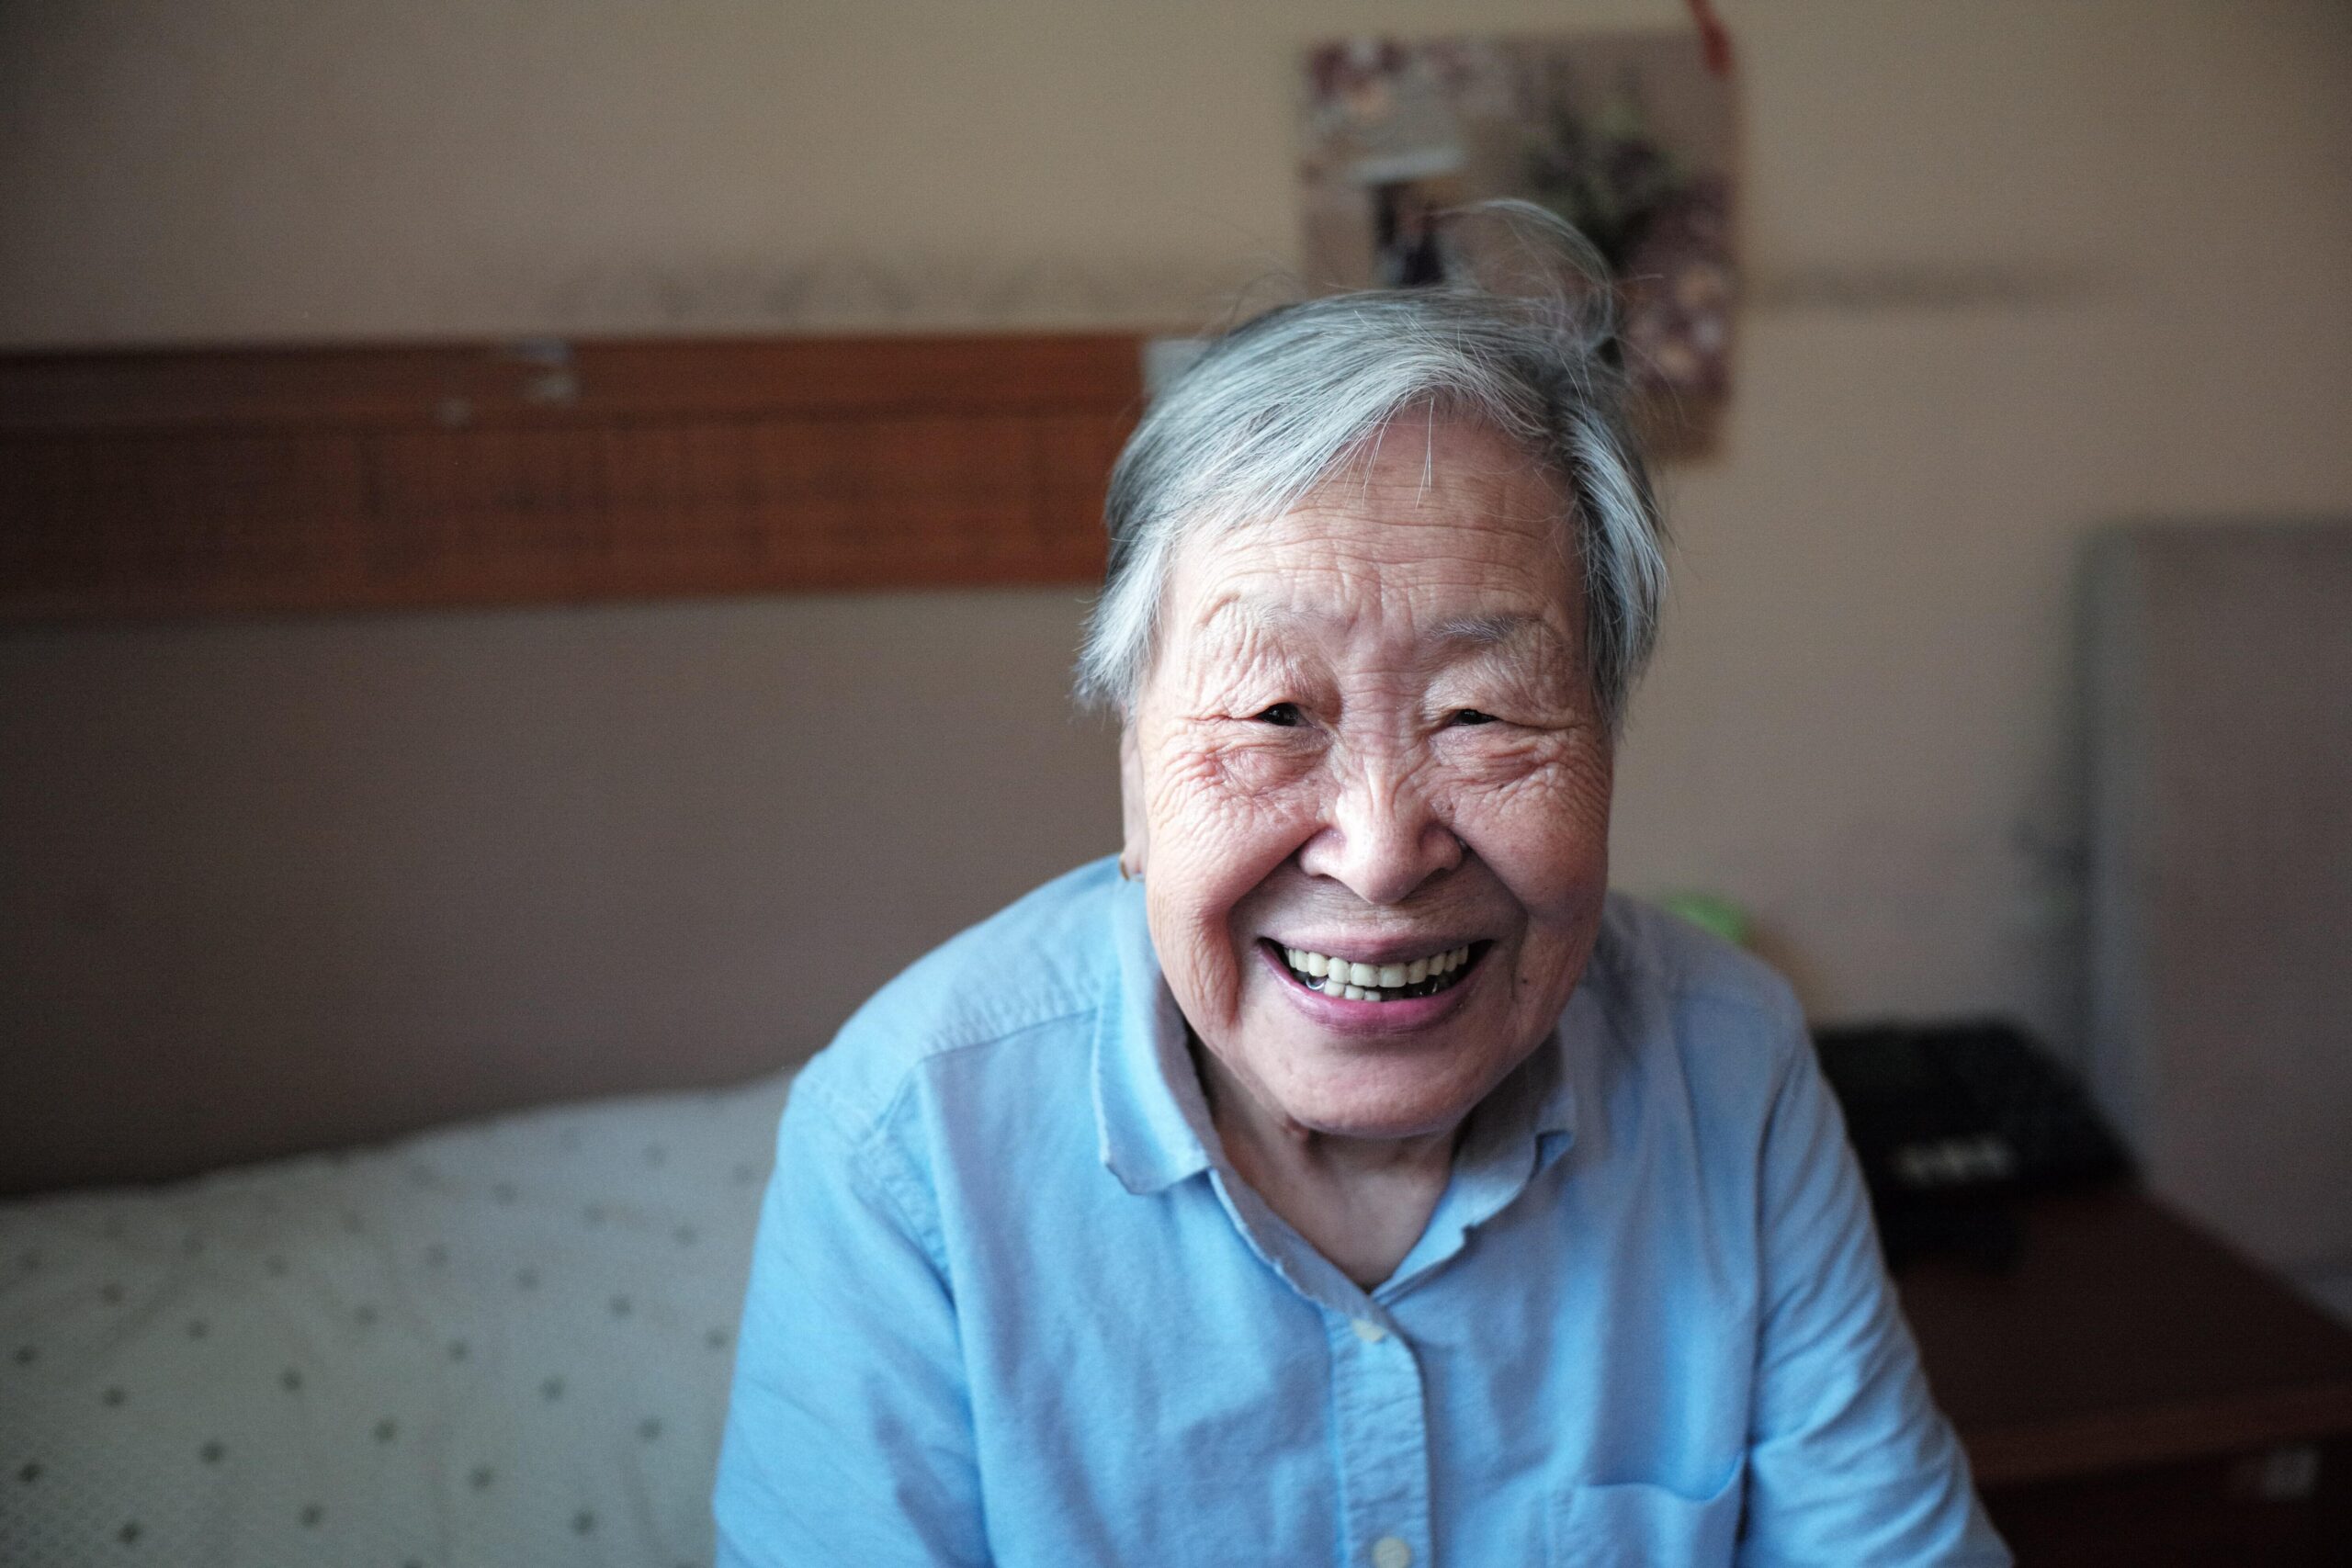 and elderly Asian woman sitting on a bed